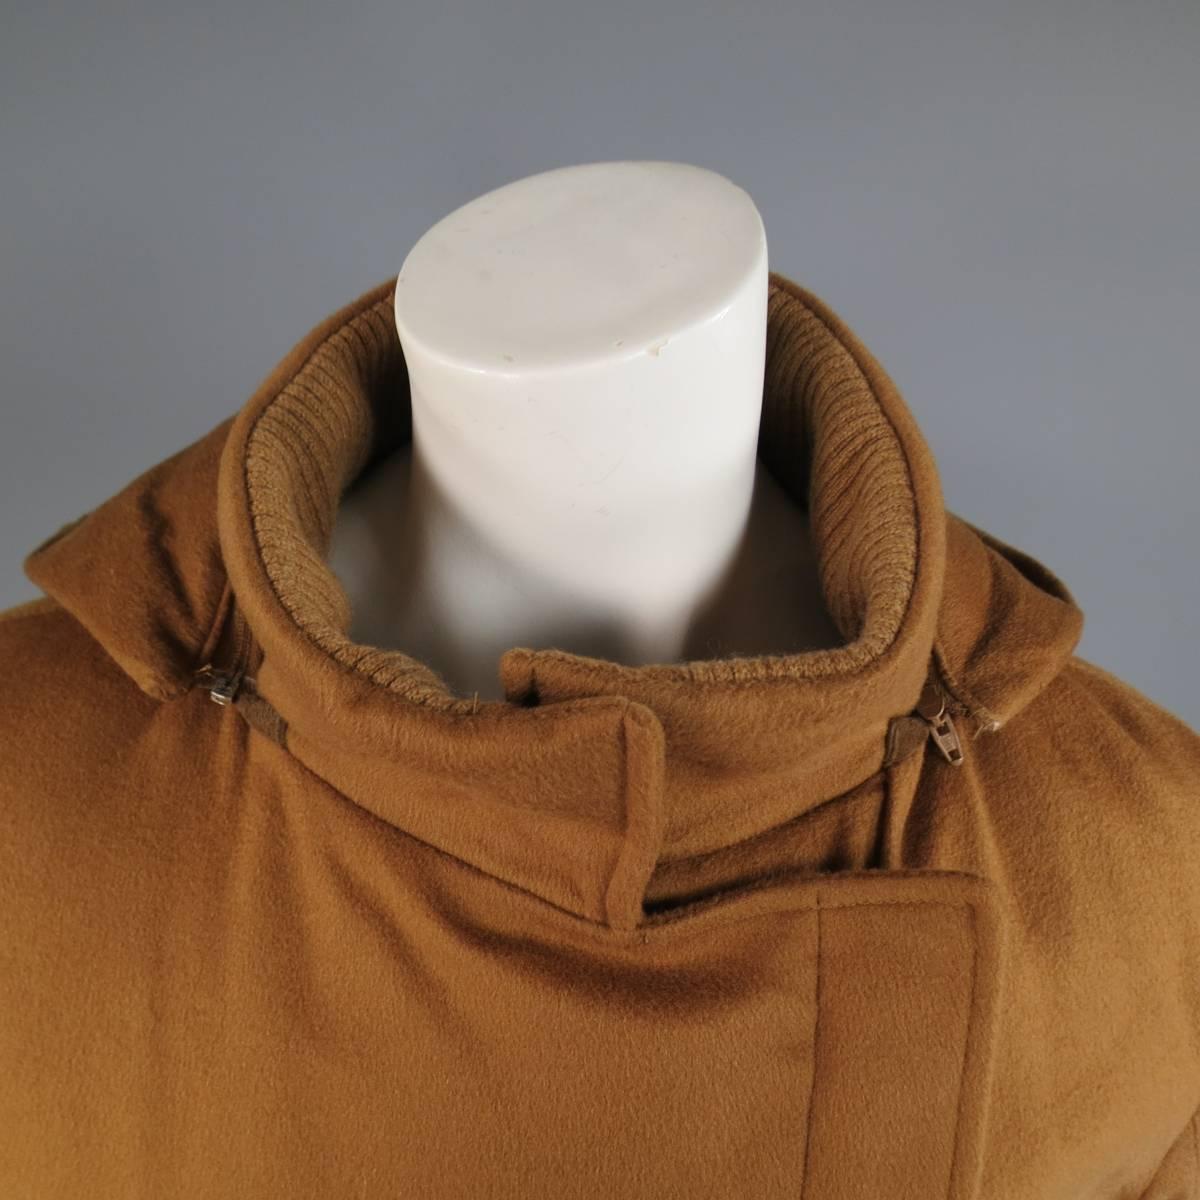 This classic LORO PIANA Storm System ski jacket comes in a a rich tan cashmere felt and features a high stand up snap collar with ribbed liner, detachable zip off hood, slit pockets, slanted hidden zip closure, and green satin padded liner. Made in